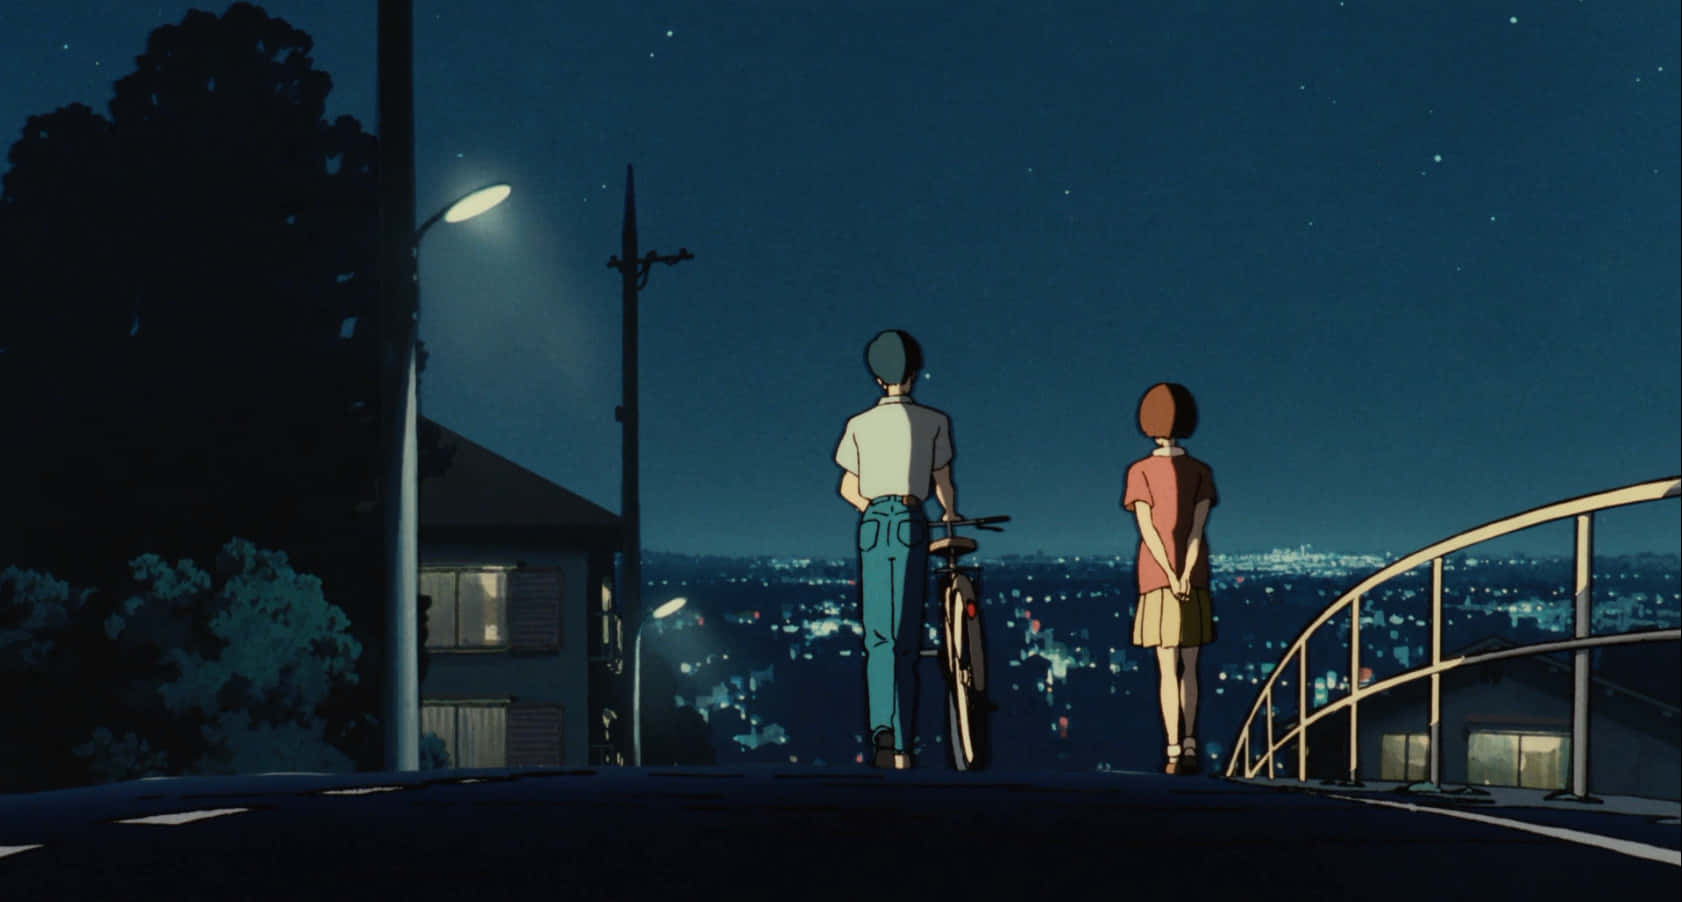 A dreamy scene from Whisper Of The Heart, featuring Seiji and Shizuku gazing at the beautiful cityscape. Wallpaper